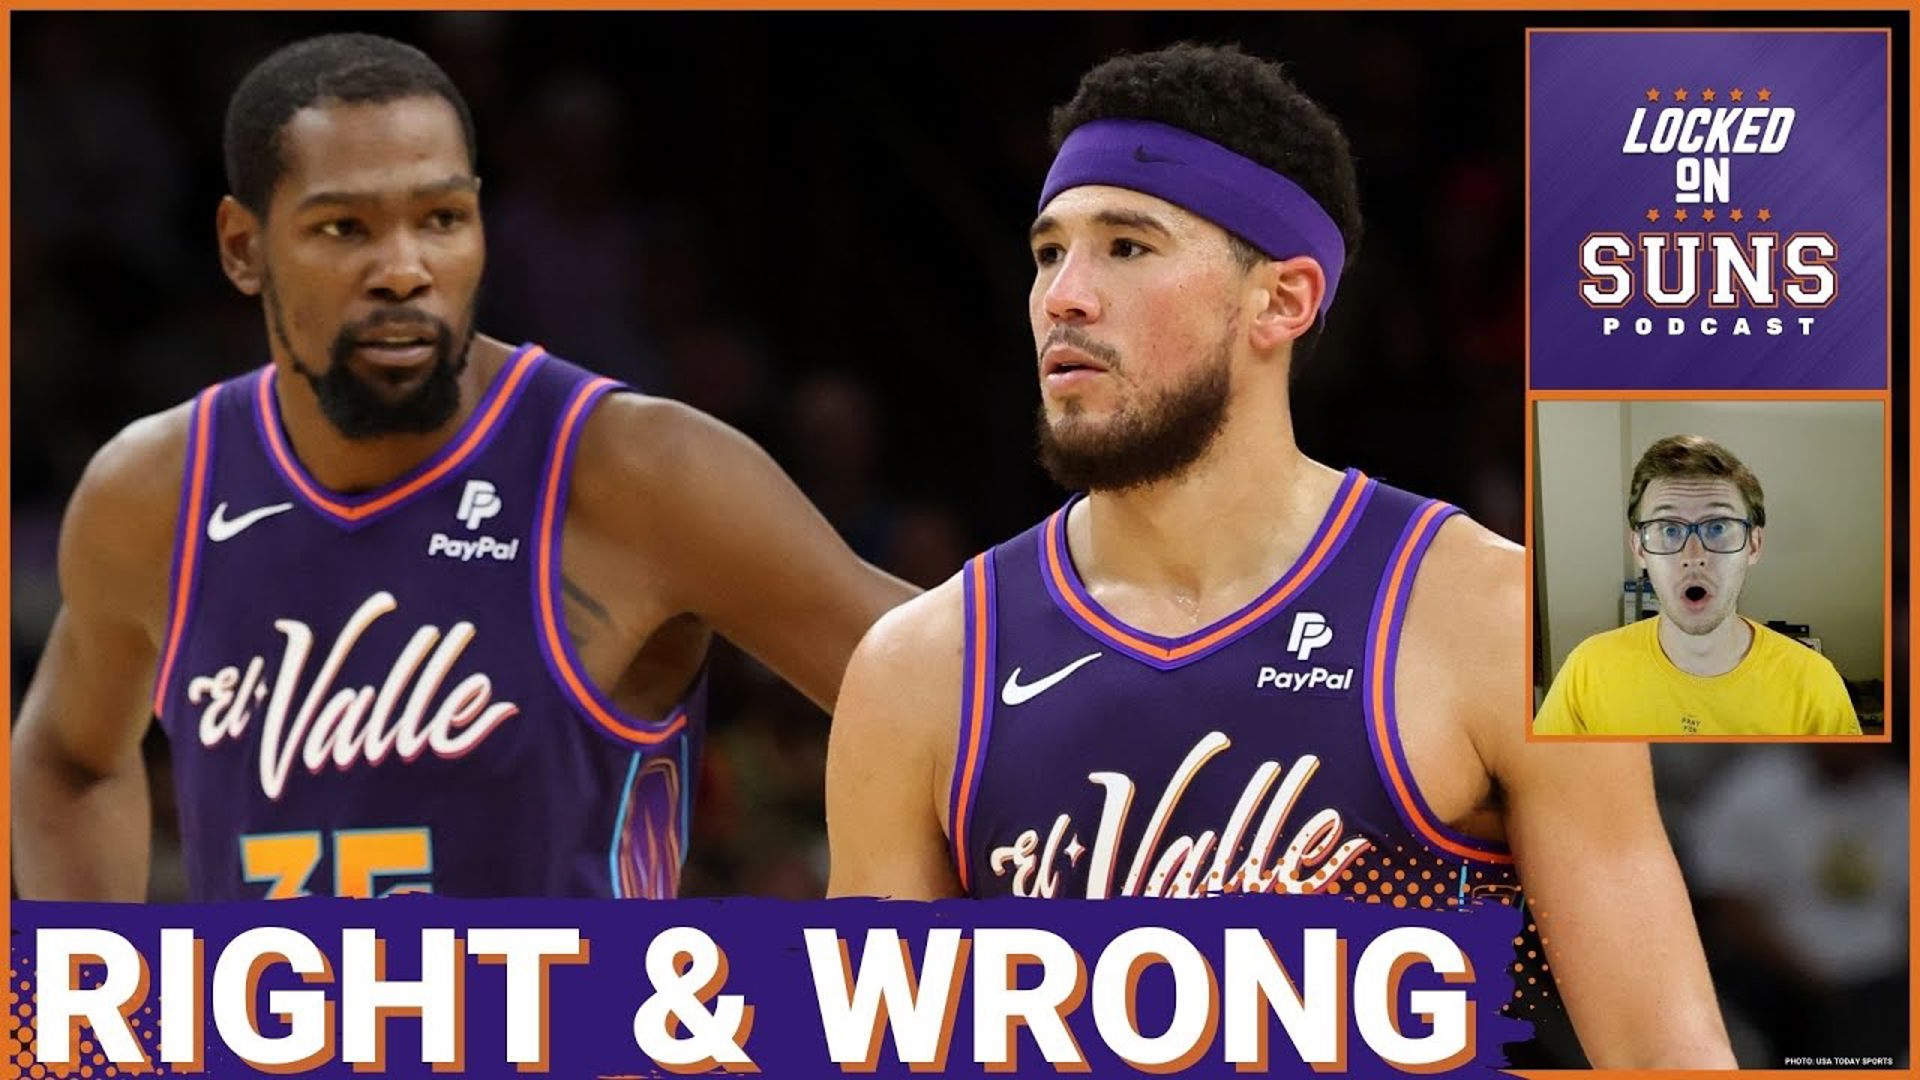 What went right and wrong for the Phoenix Suns vs the Minnesota Timberwolves so far?